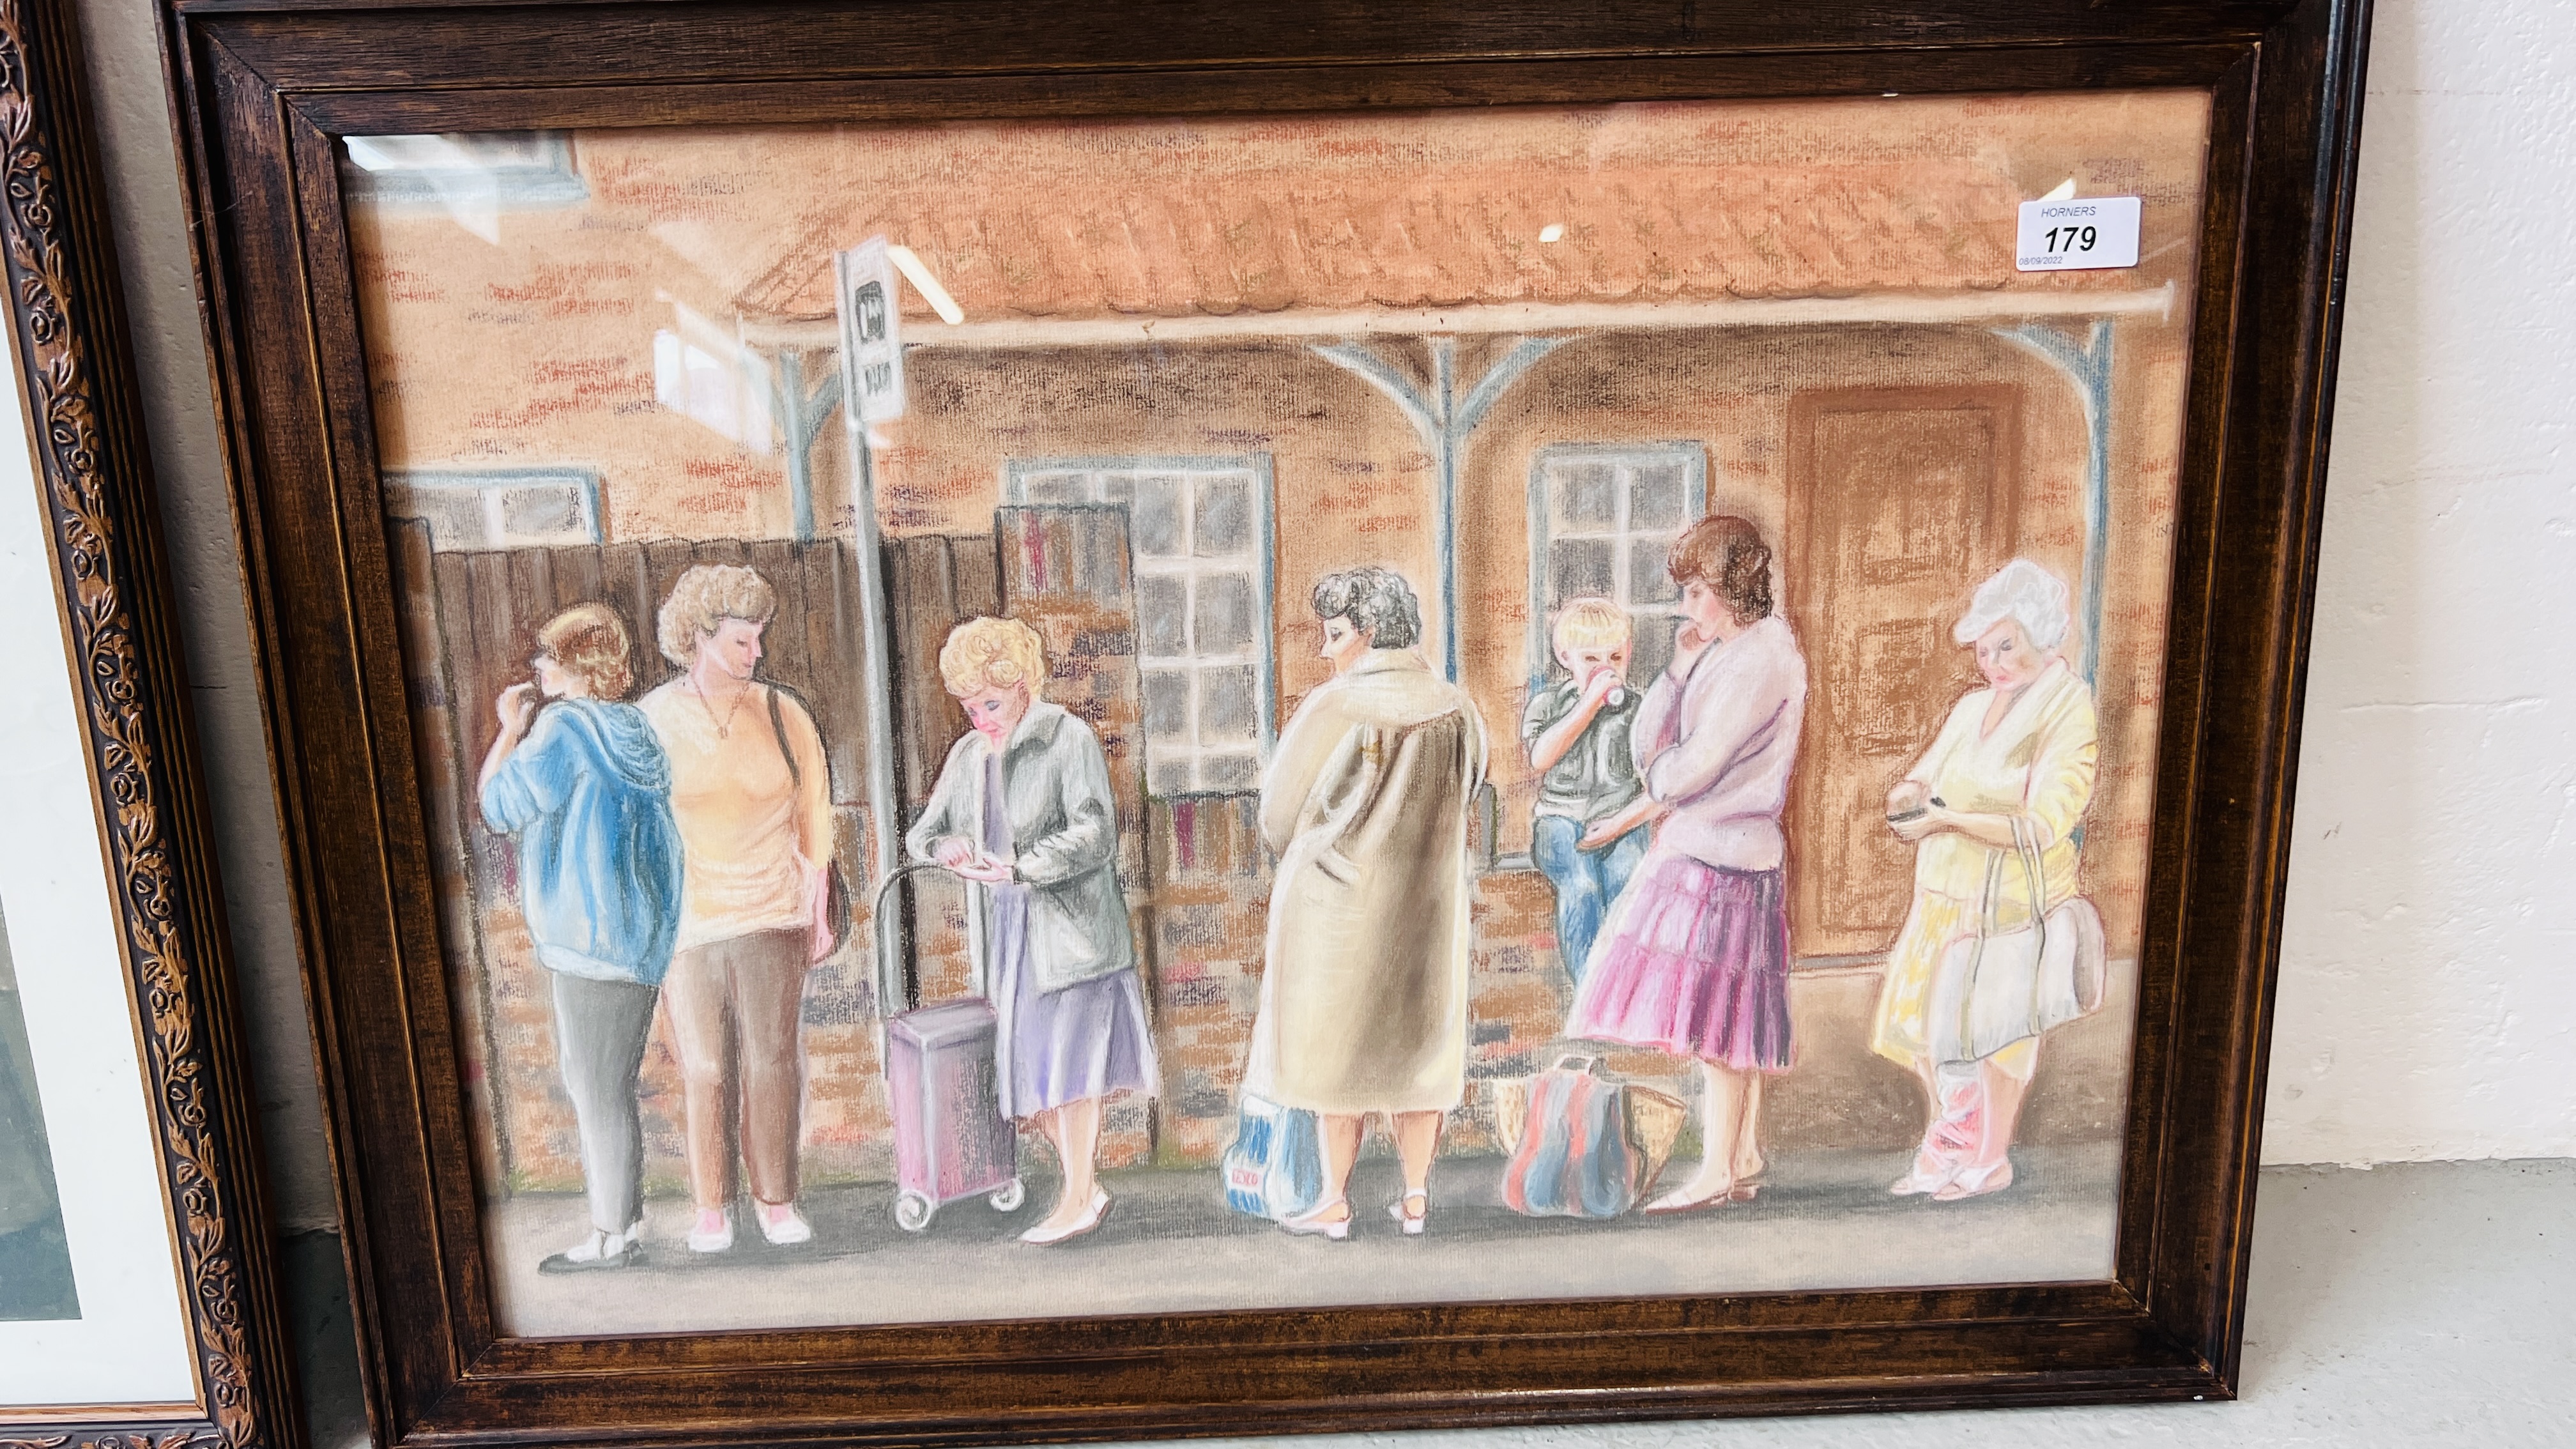 AN ORIGINAL ART WORK "BUS STOP AT WARE" BY C. - Image 2 of 3